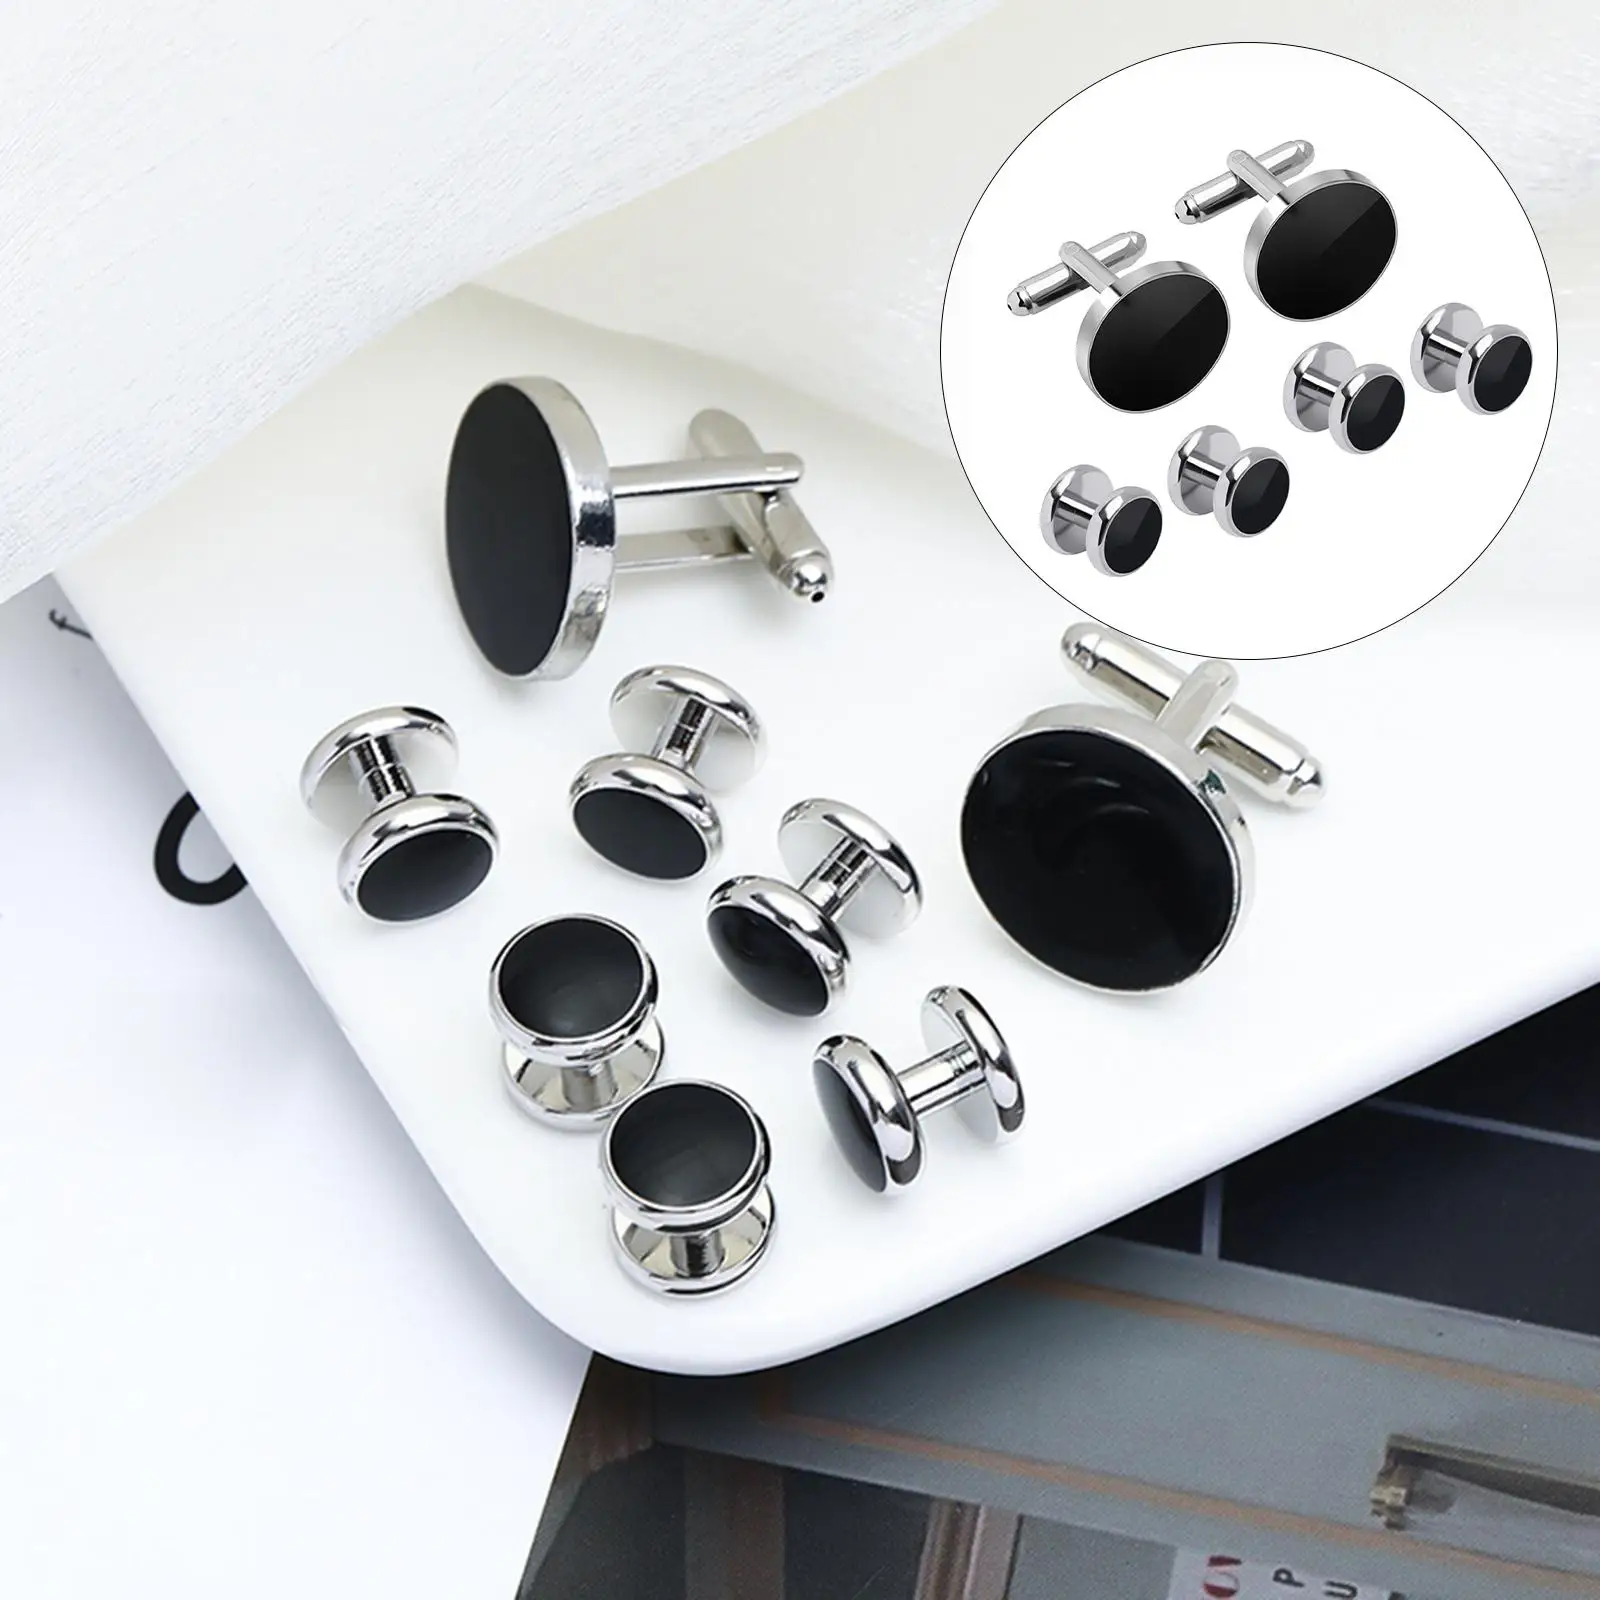 Cufflinks and Studs Set, Customed Formal Solid Unique Jewelry,  Links Kit for Tuxedo Puit Shirts Party Business Wedding